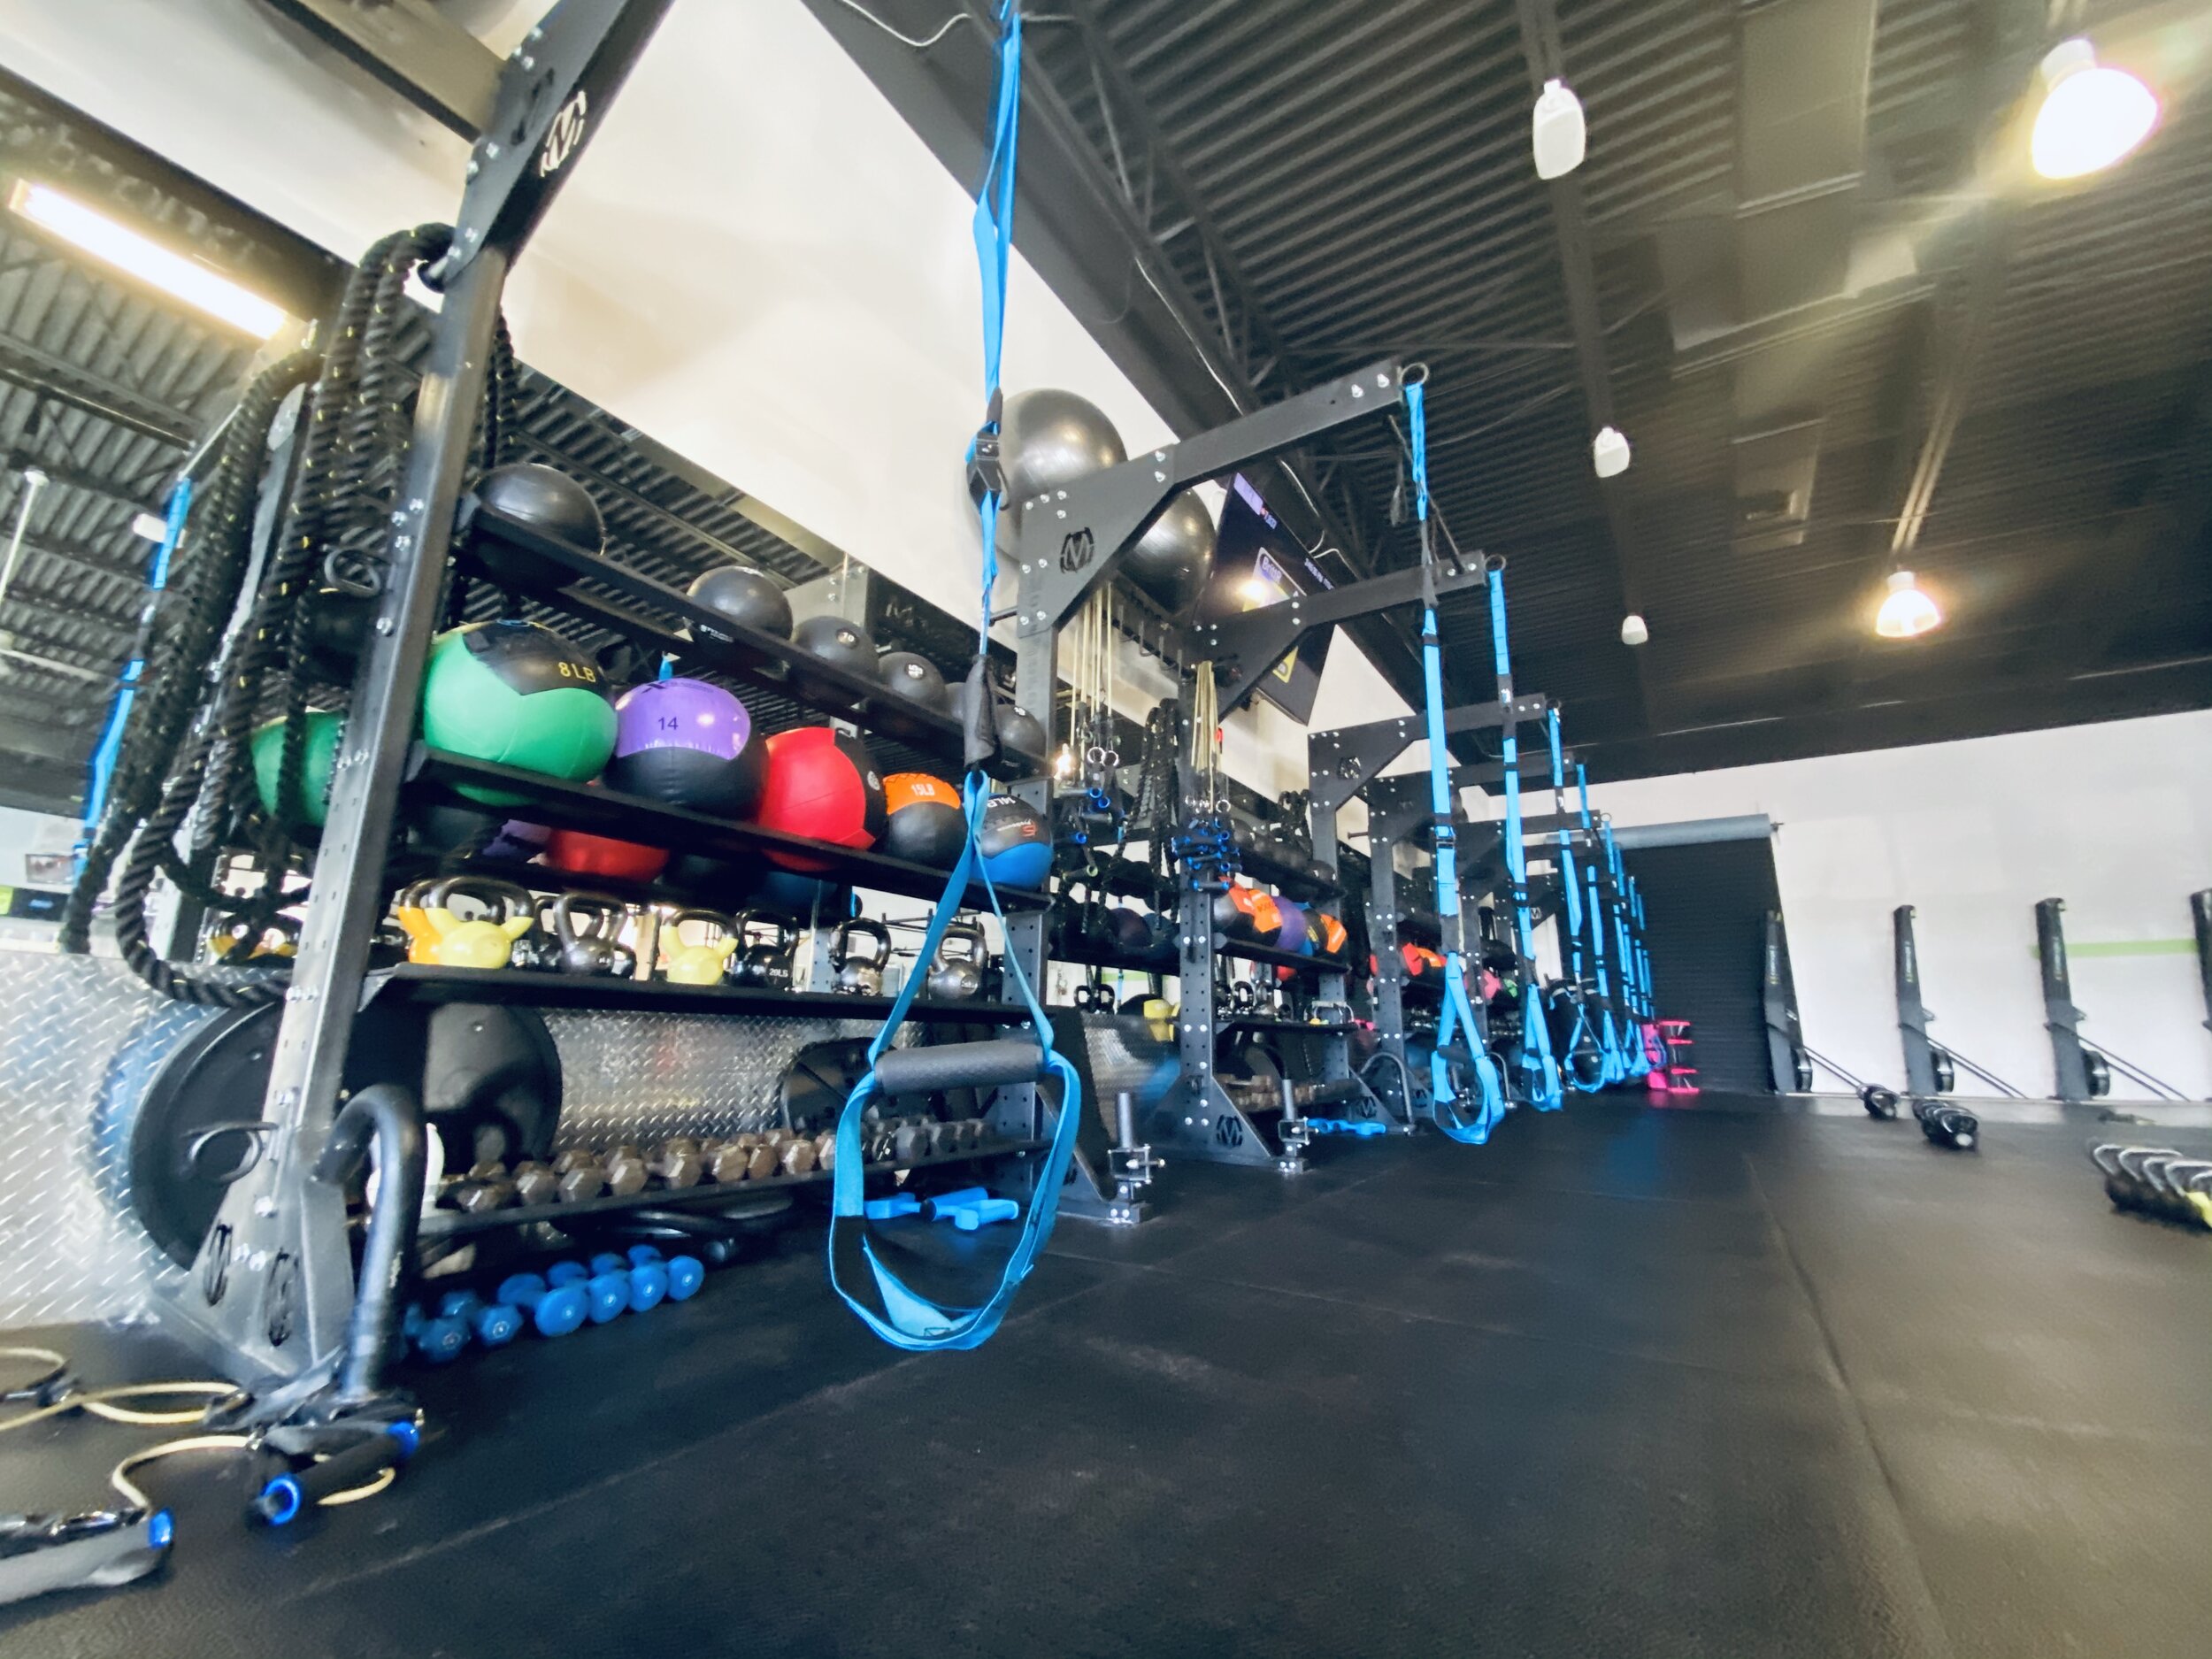 MoveStrong Functional fitness training equipment and storage solutions